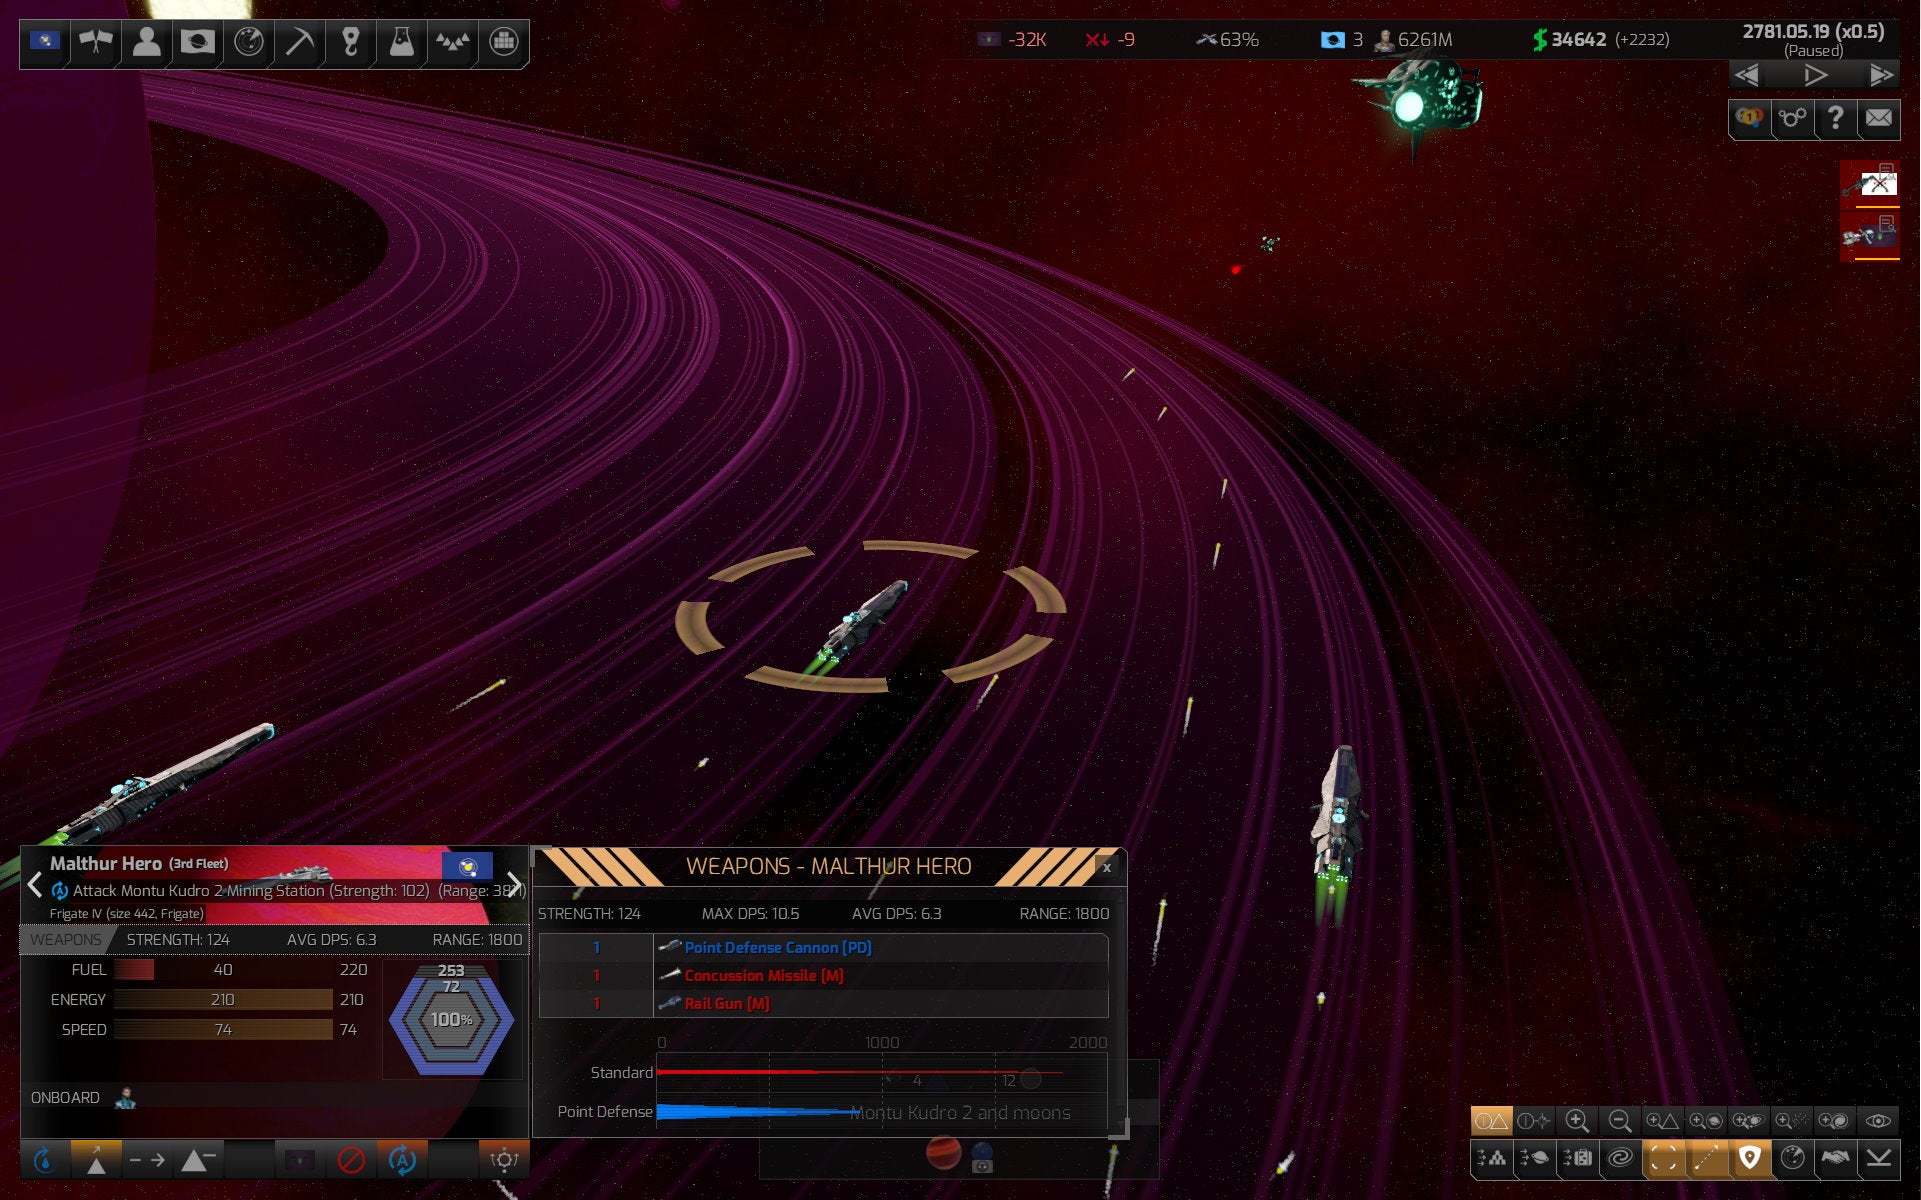 A ship travels across the purple rings of a planet in Distant Worlds 2